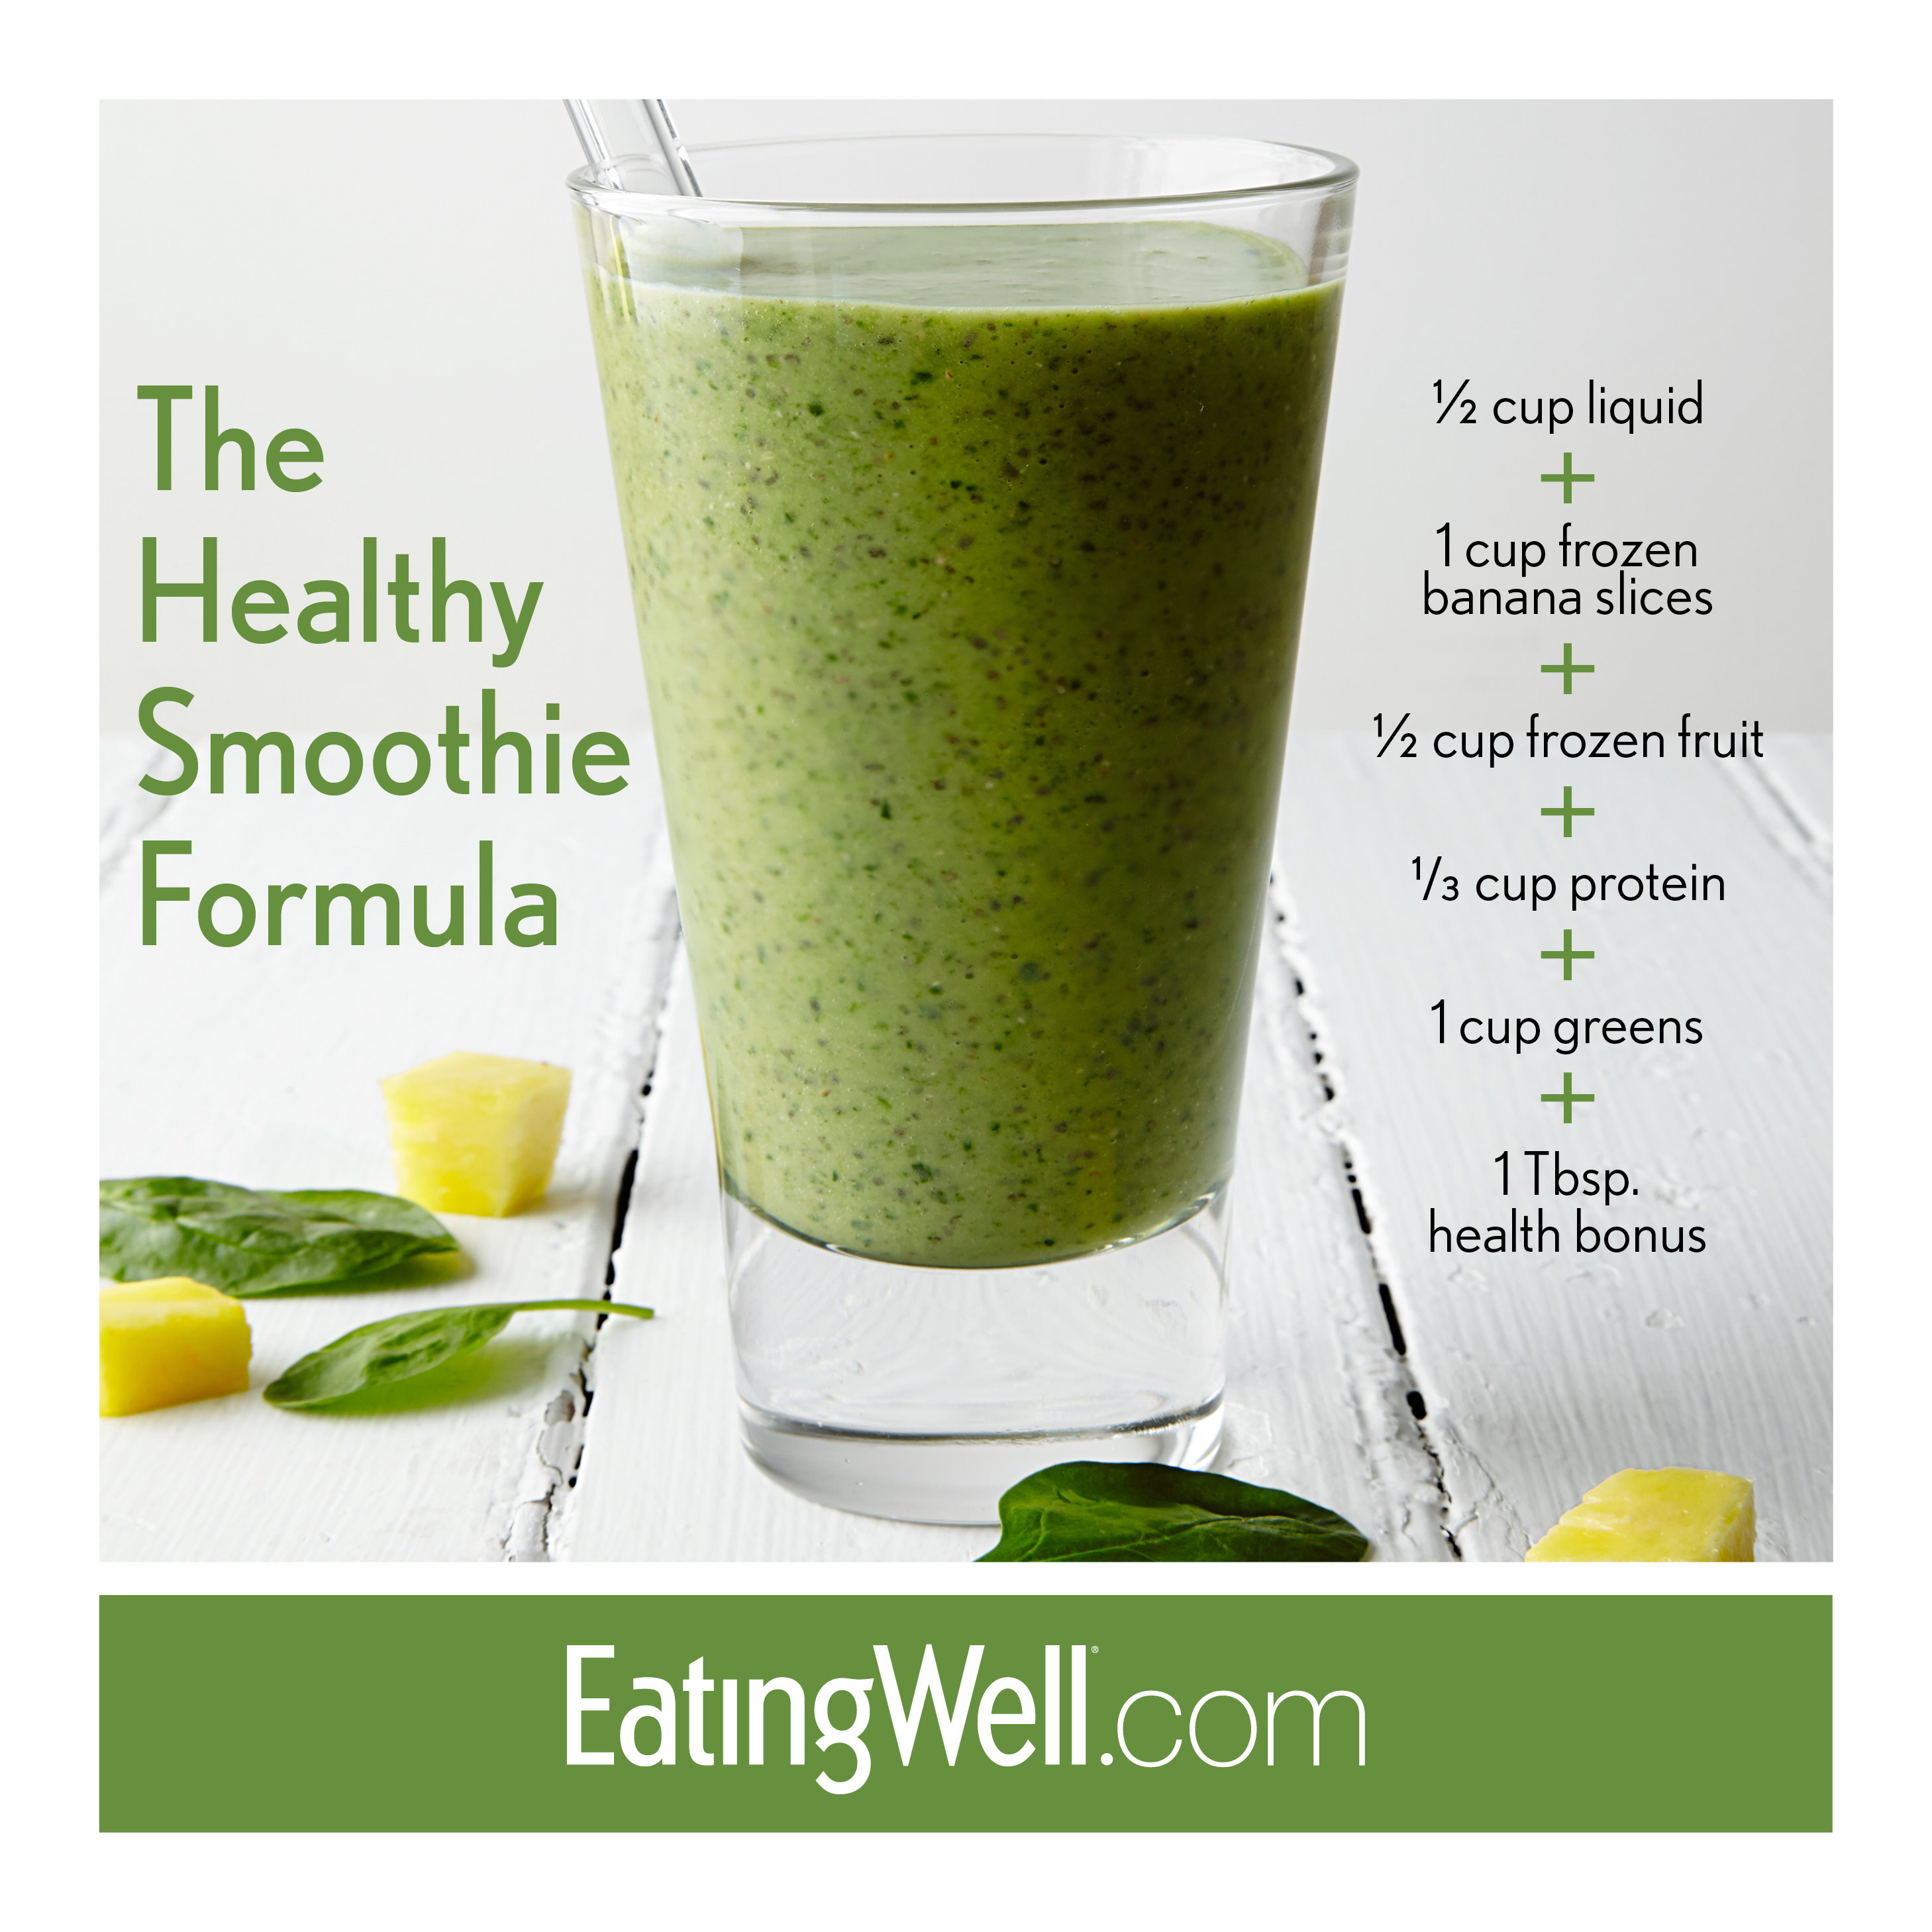 Smoothie Recipes Healthy
 The Ultimate Green Smoothie Recipe EatingWell